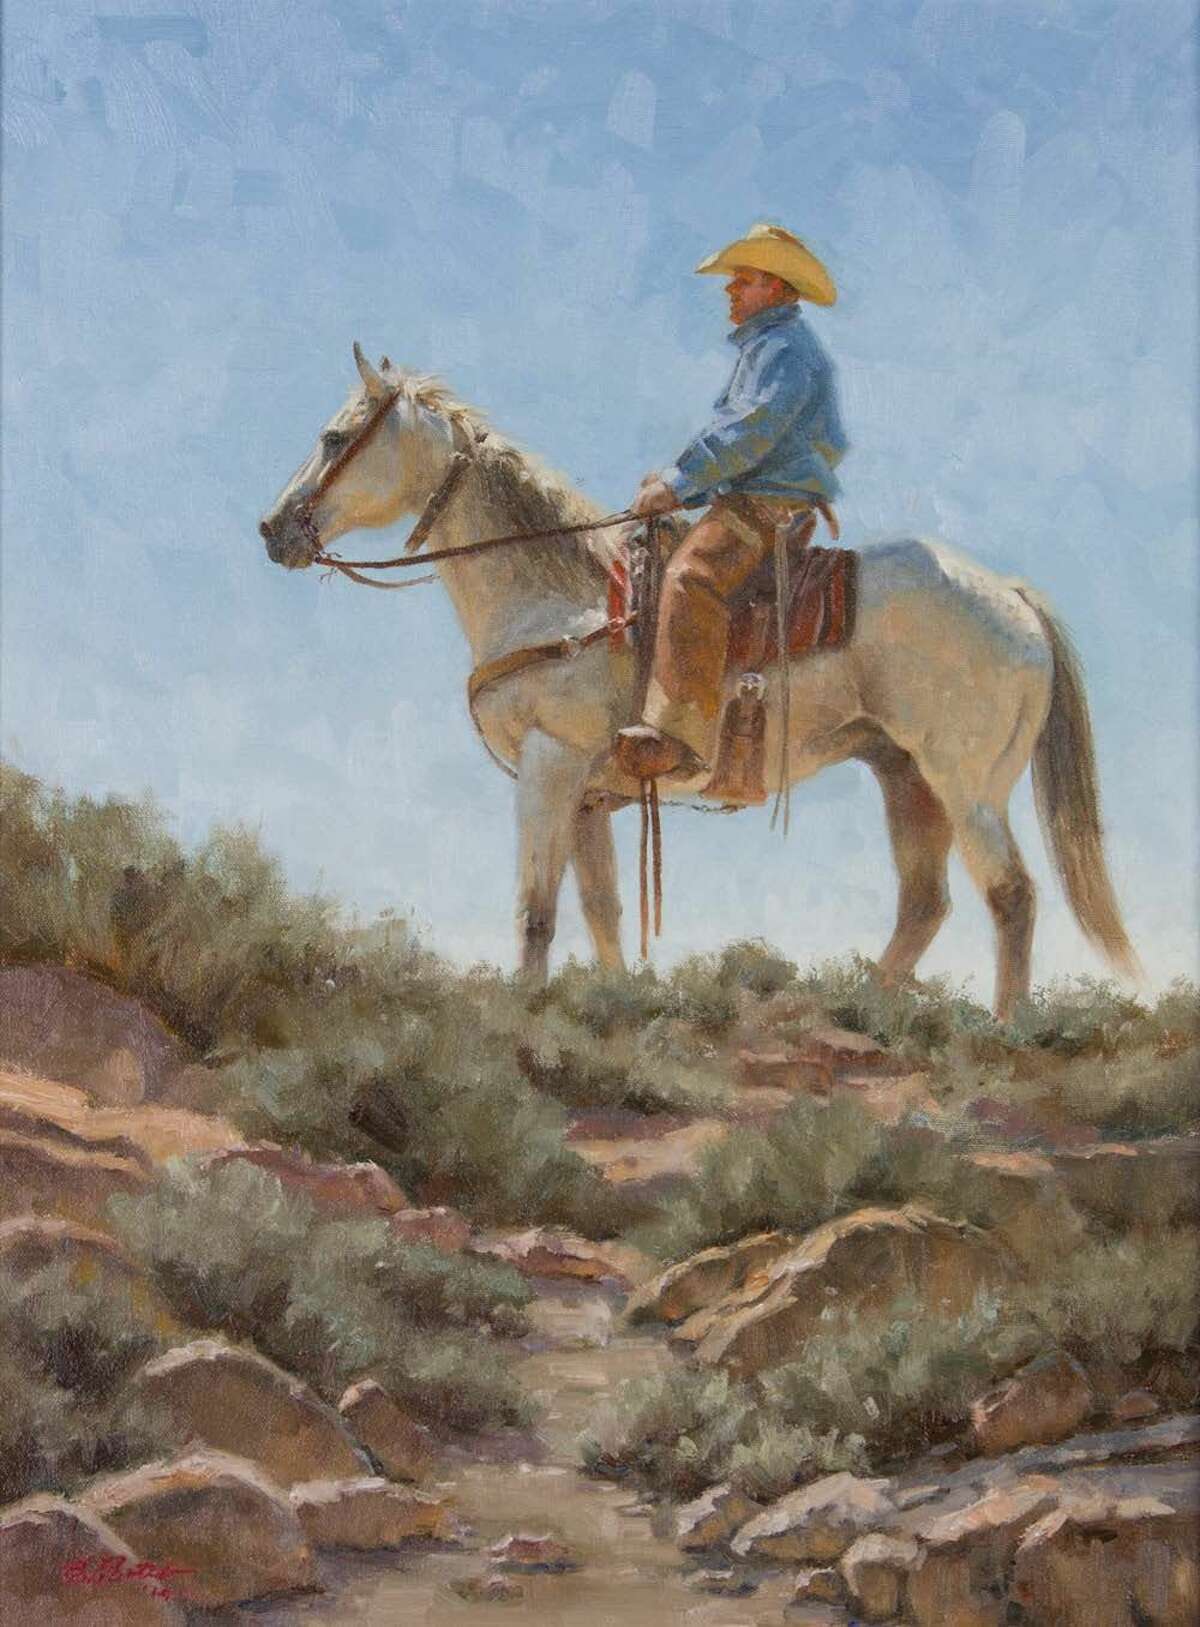 “Sentinel” is by Edgar Sotelo, one of the American Quarter Horse Association’s signature artists for the year, who is also participating in the educational field trip.